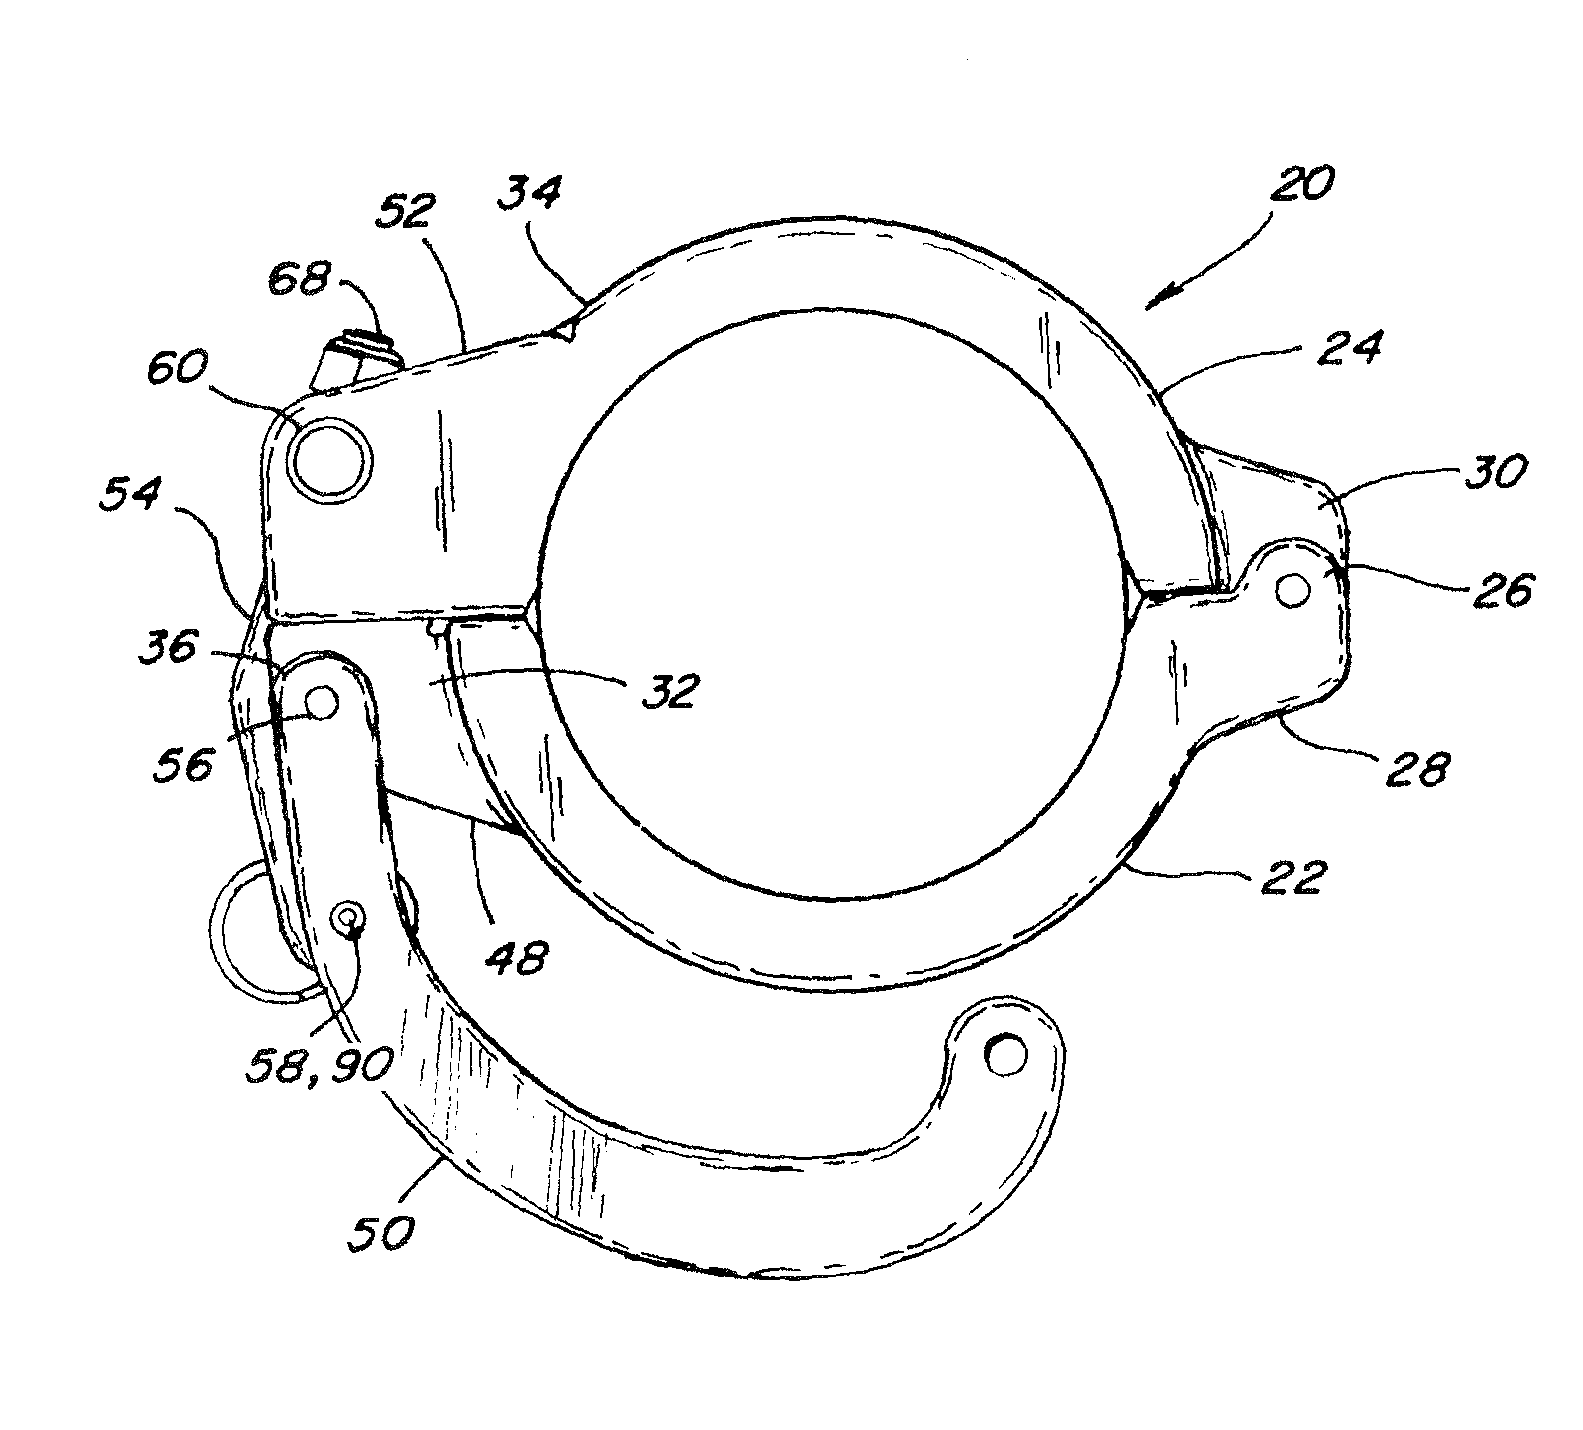 Pipe coupler and coupling system with positive retention and sealing capability